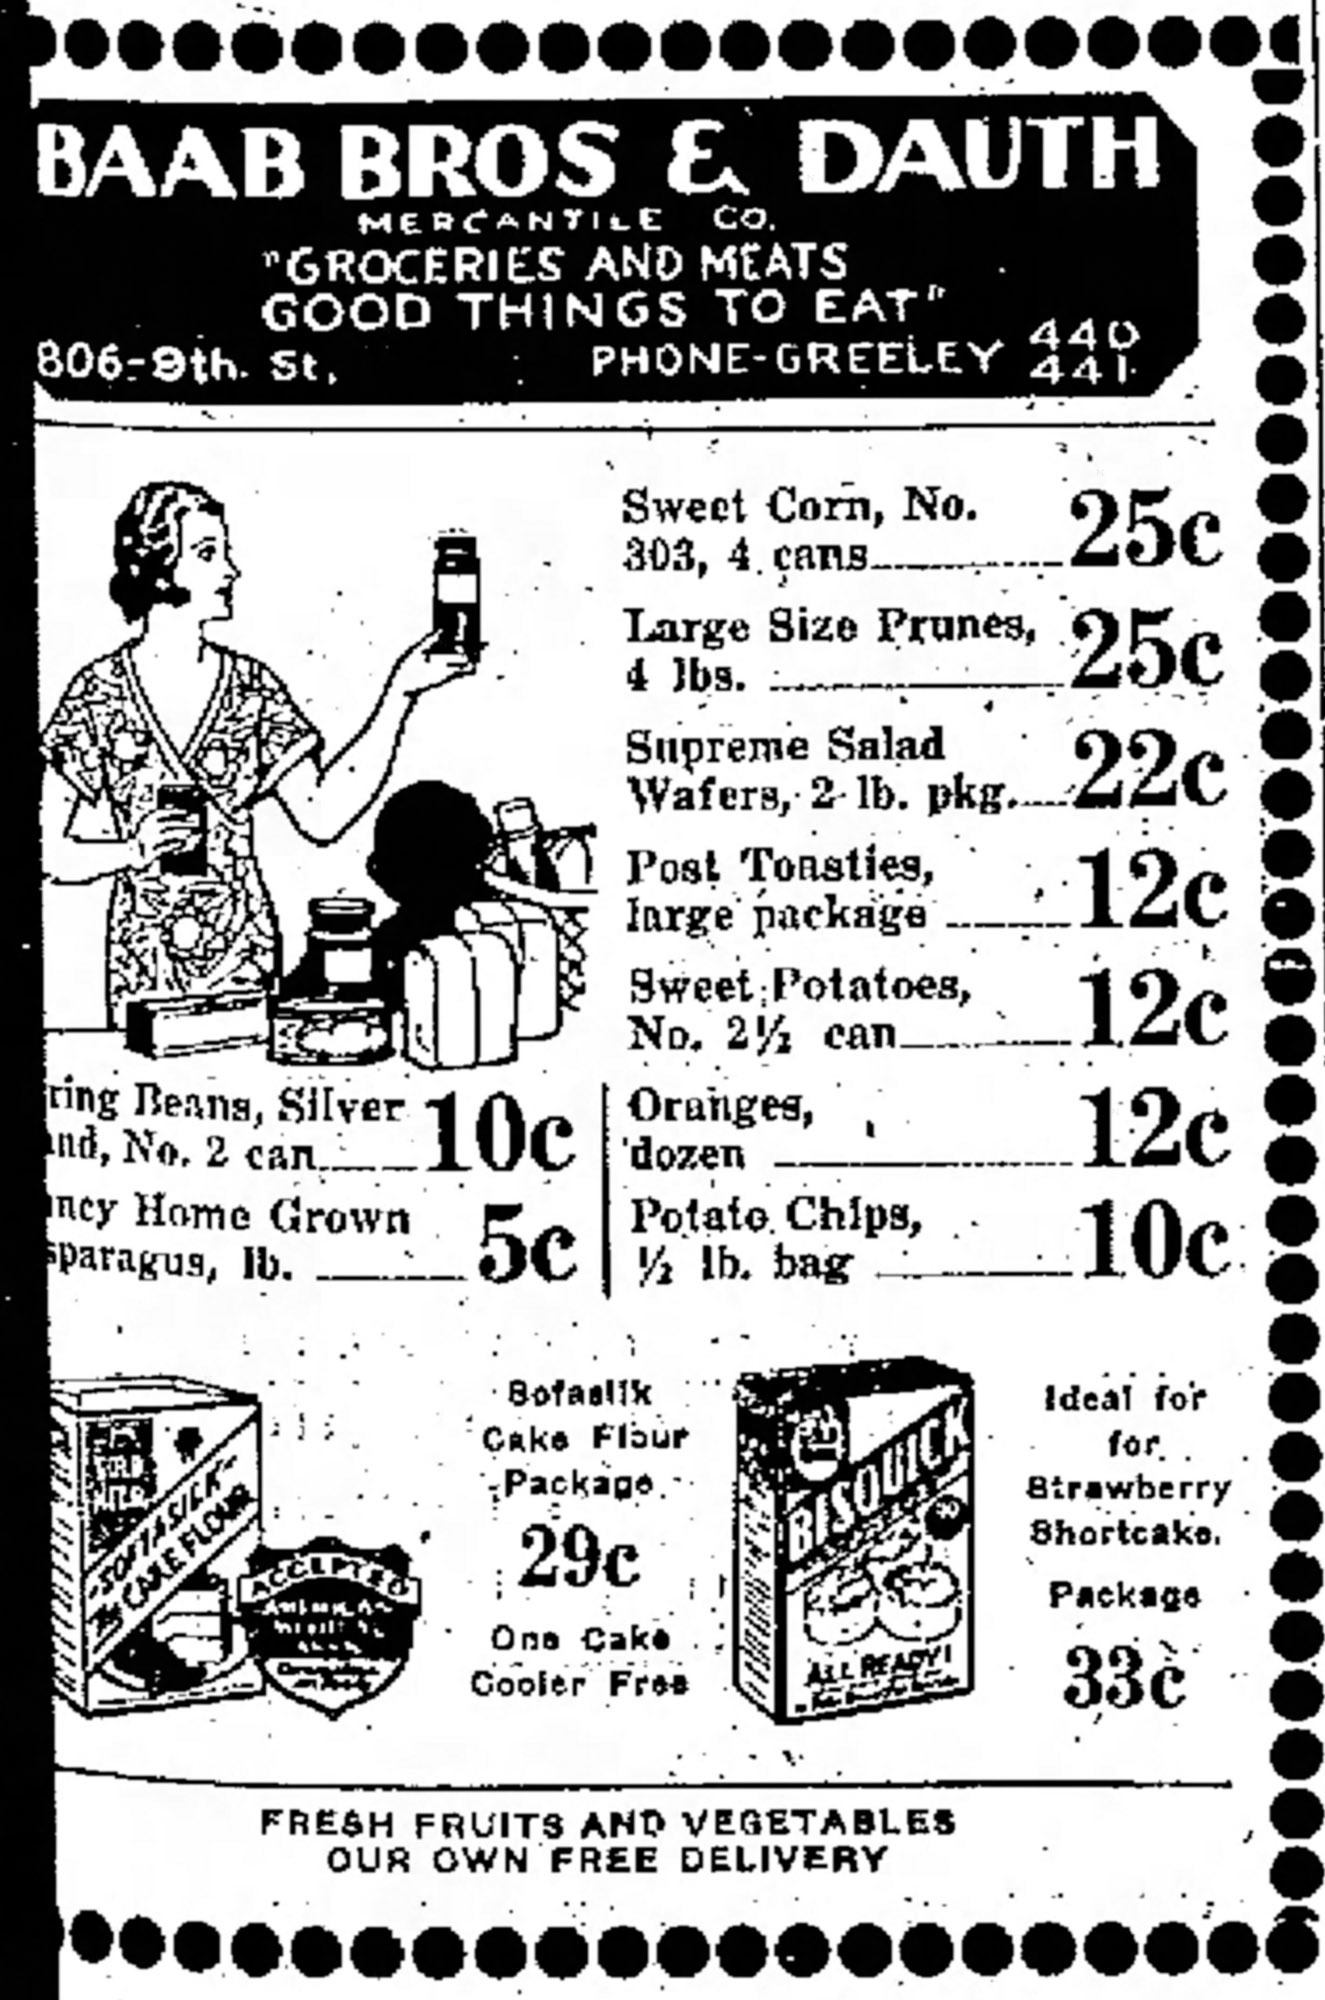 Dauth Family Archive - 1933-05-19 - Greeley Daily Tribune - Baab Bros and Dauth Advertisement